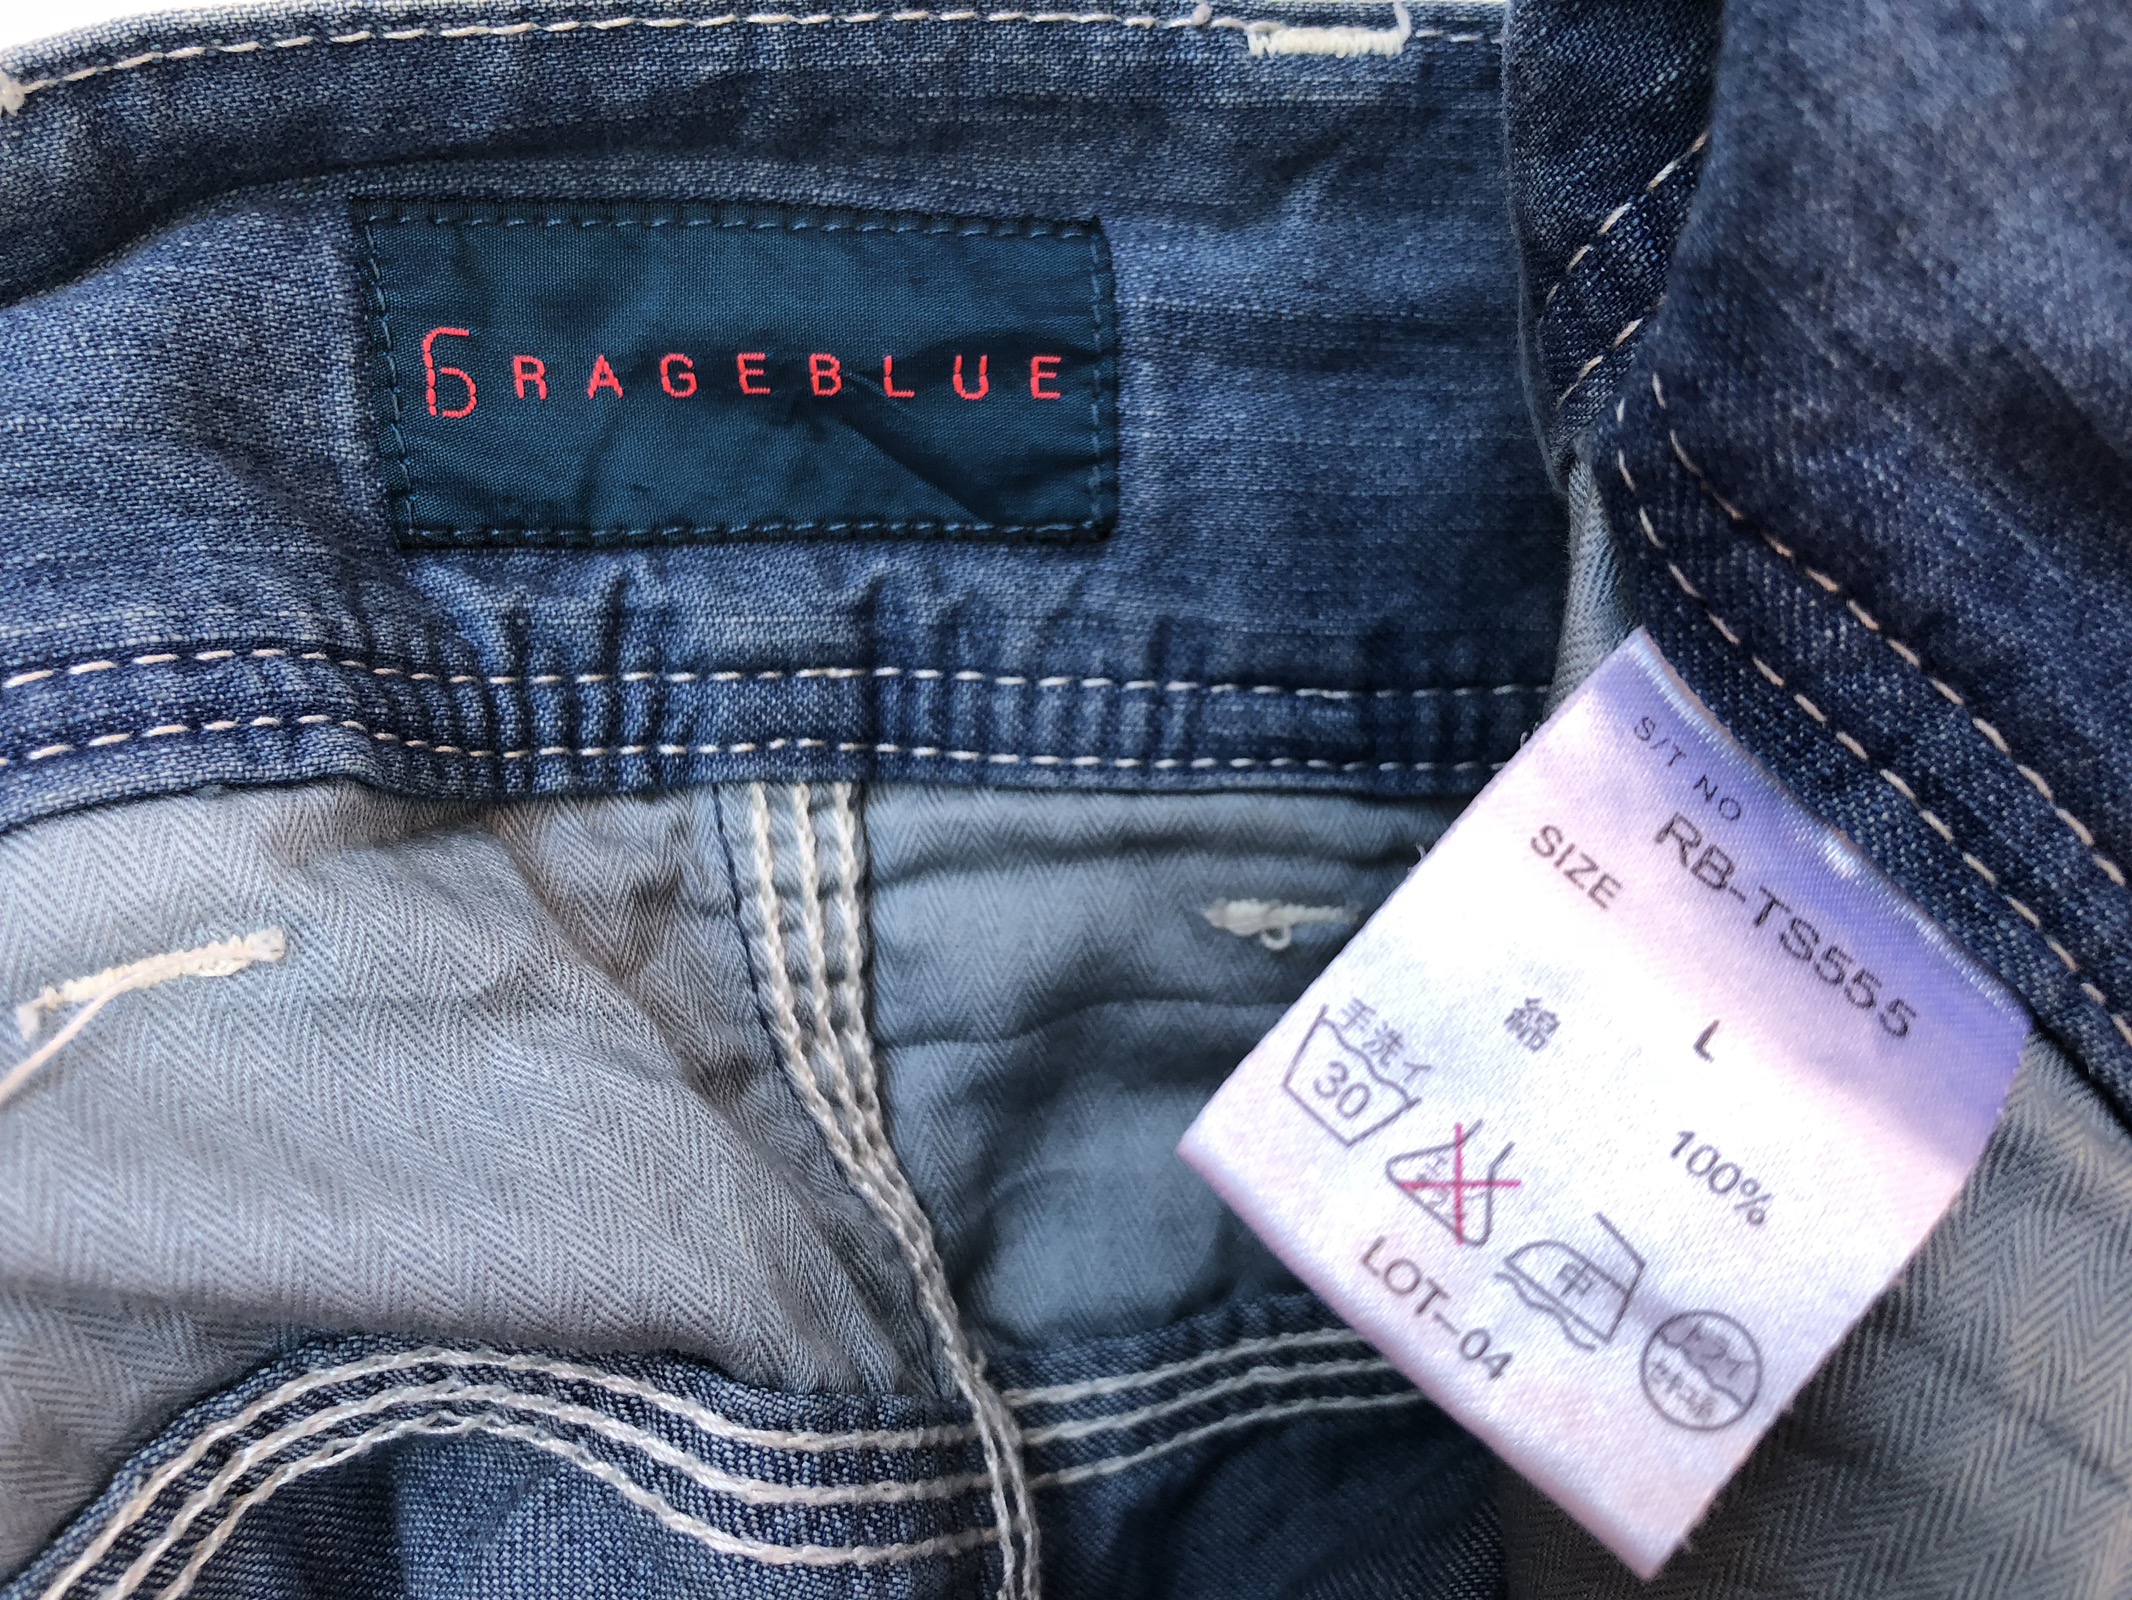 Workers - JAPANESE BRAND RAGEBLUE OVERALL WORKWEAR STYLE - 12